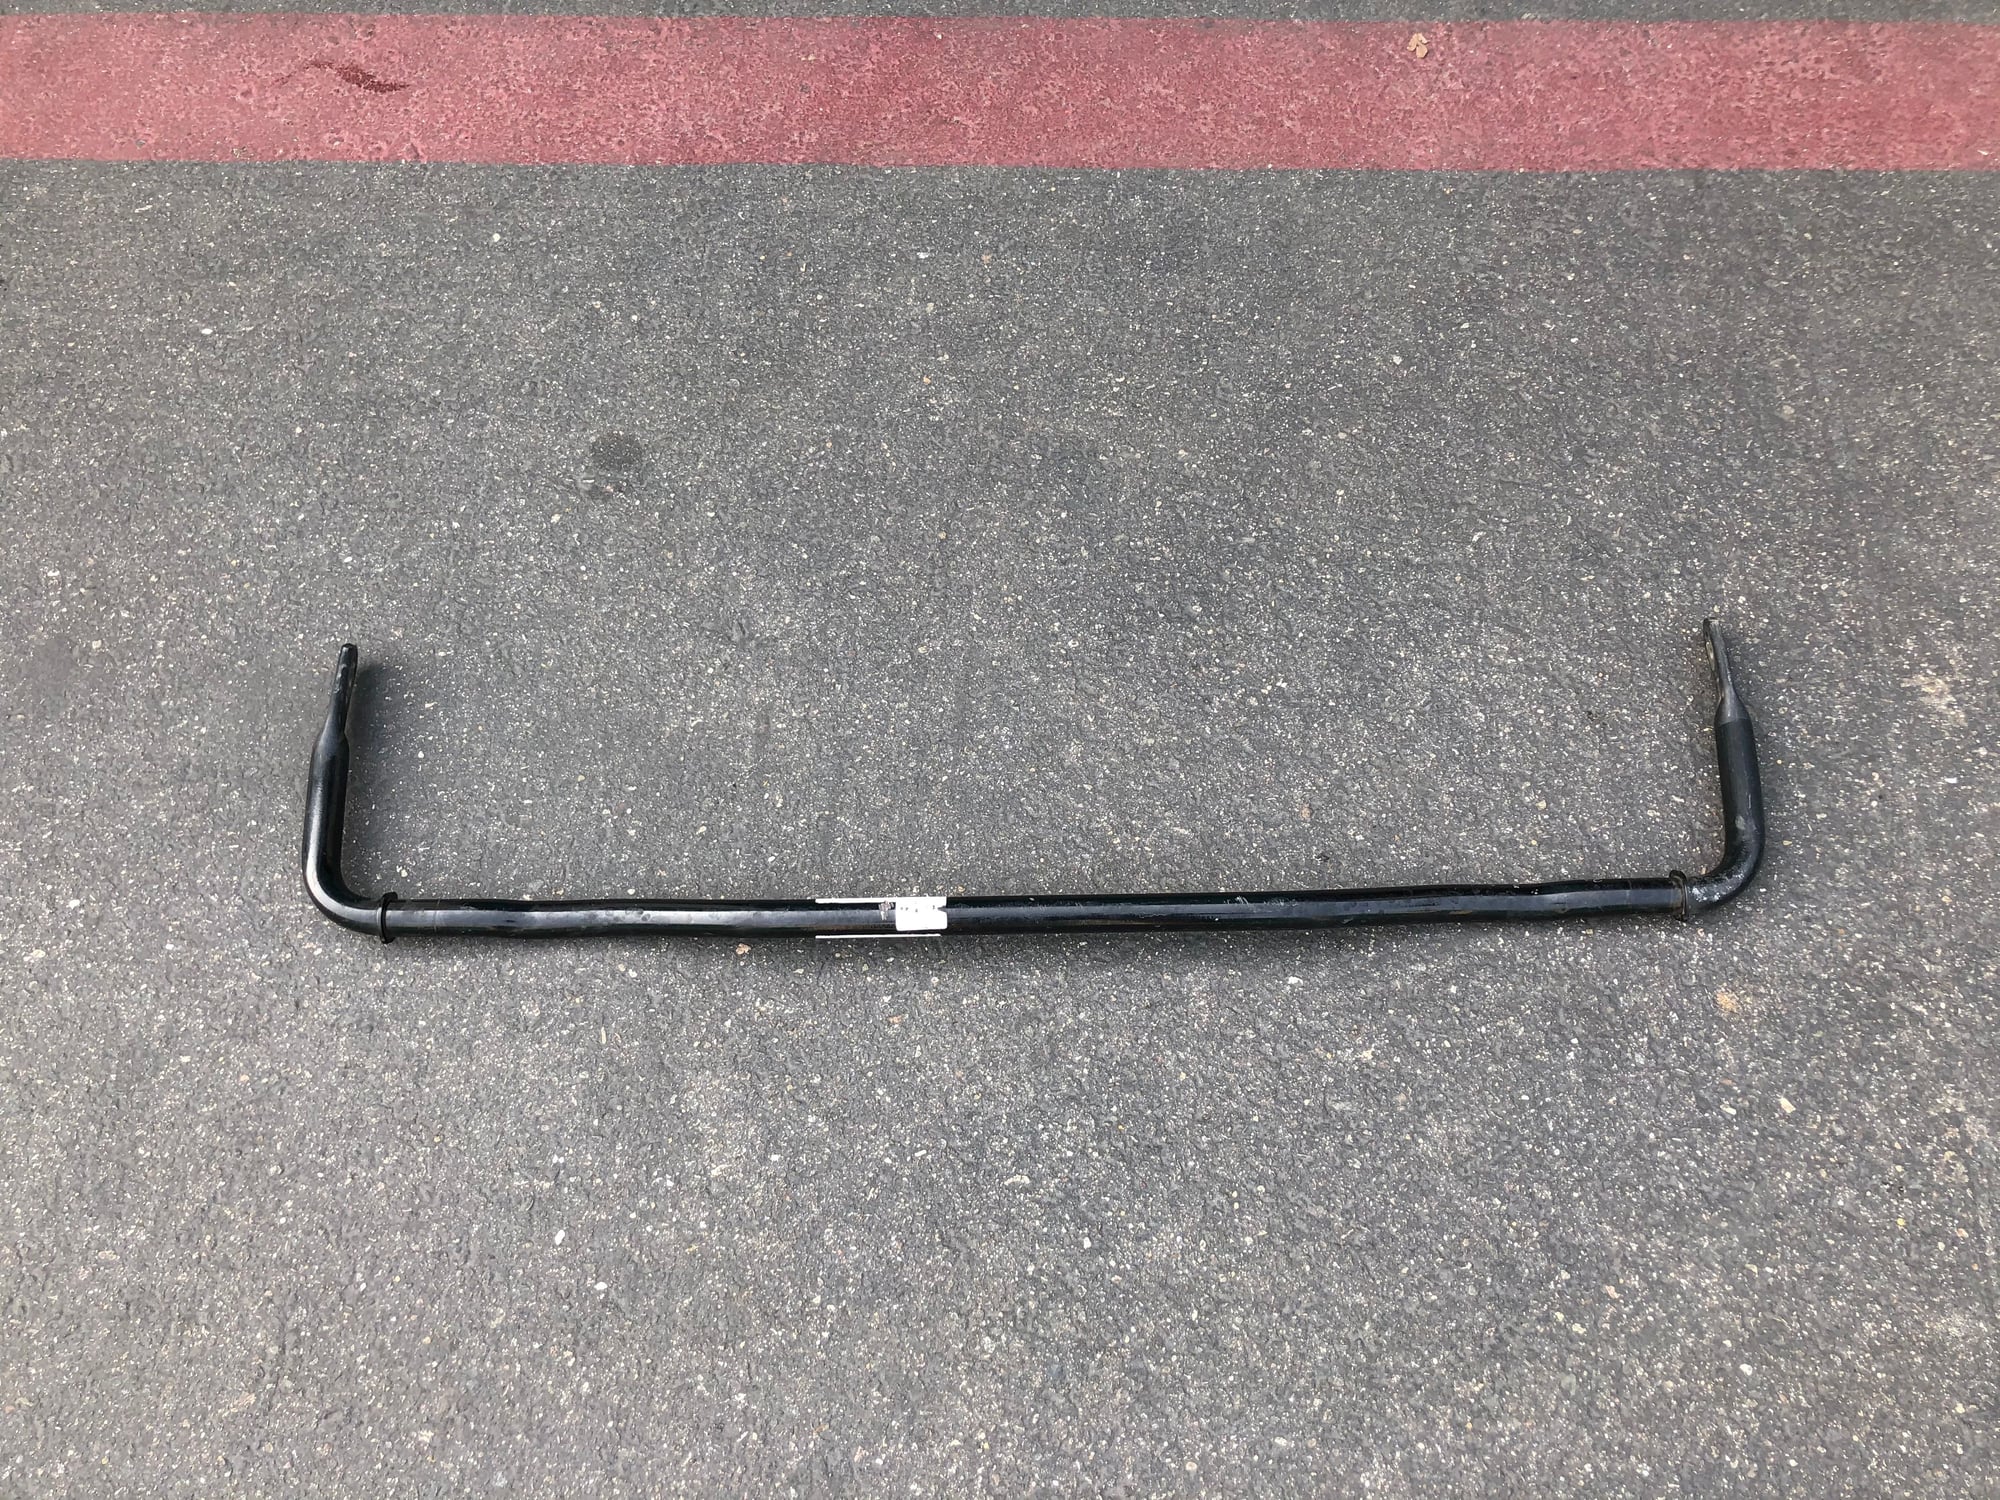 2018 Porsche GT3 - 991 GT3 front and rear sway bars - Steering/Suspension - $300 - Irvine, CA 92620, United States